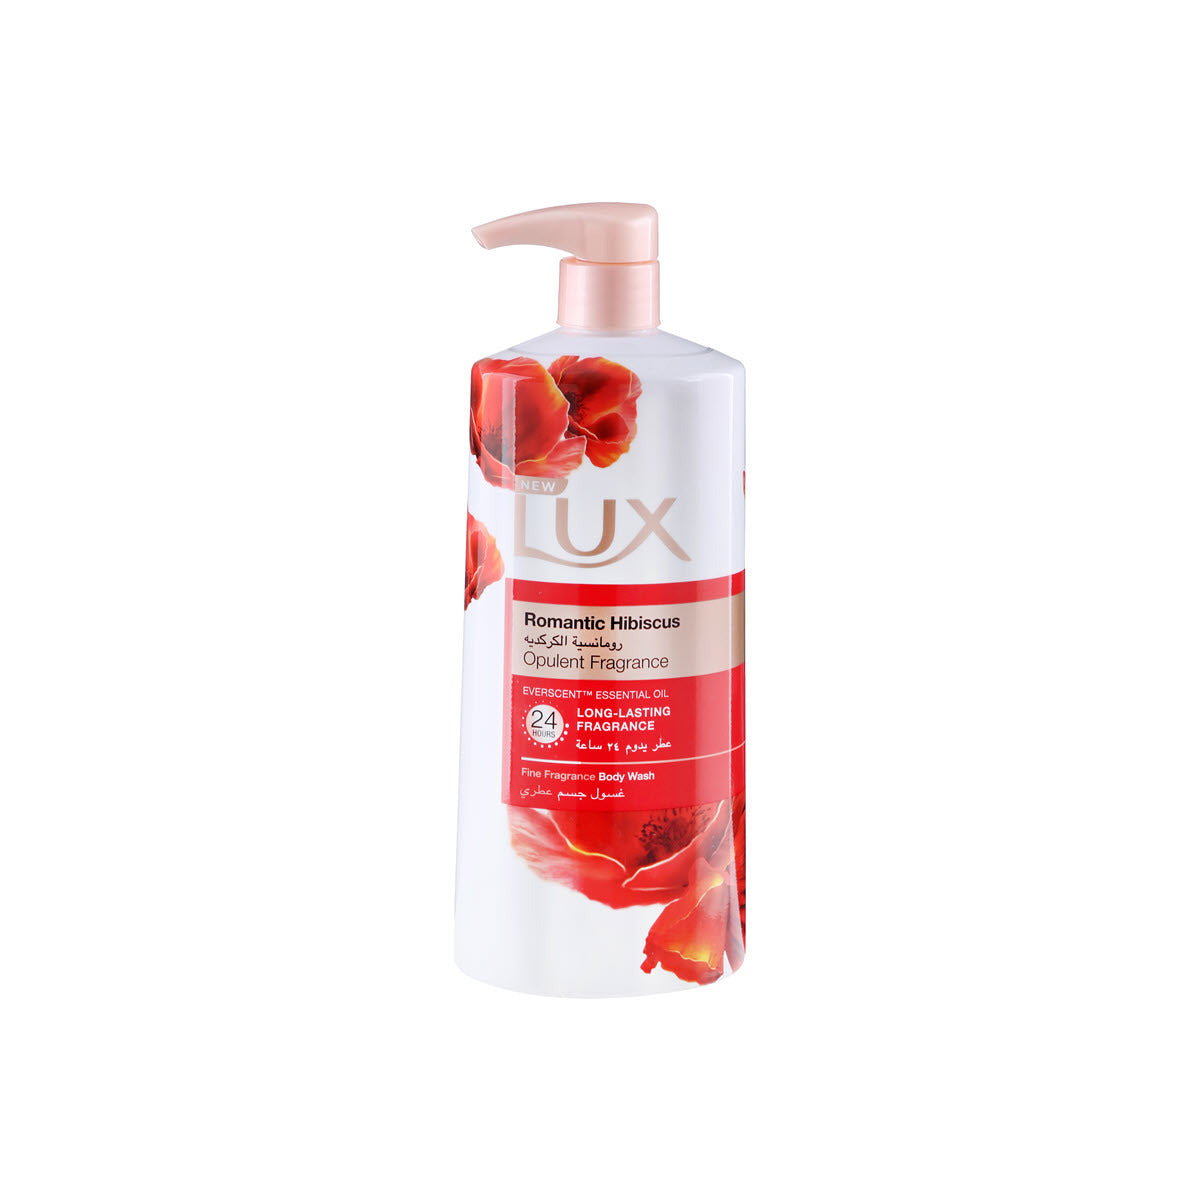 Lux Perfumed Body Wash Romantic Hibiscus For 24 Hours Long Lasting Fragrance 700 ml